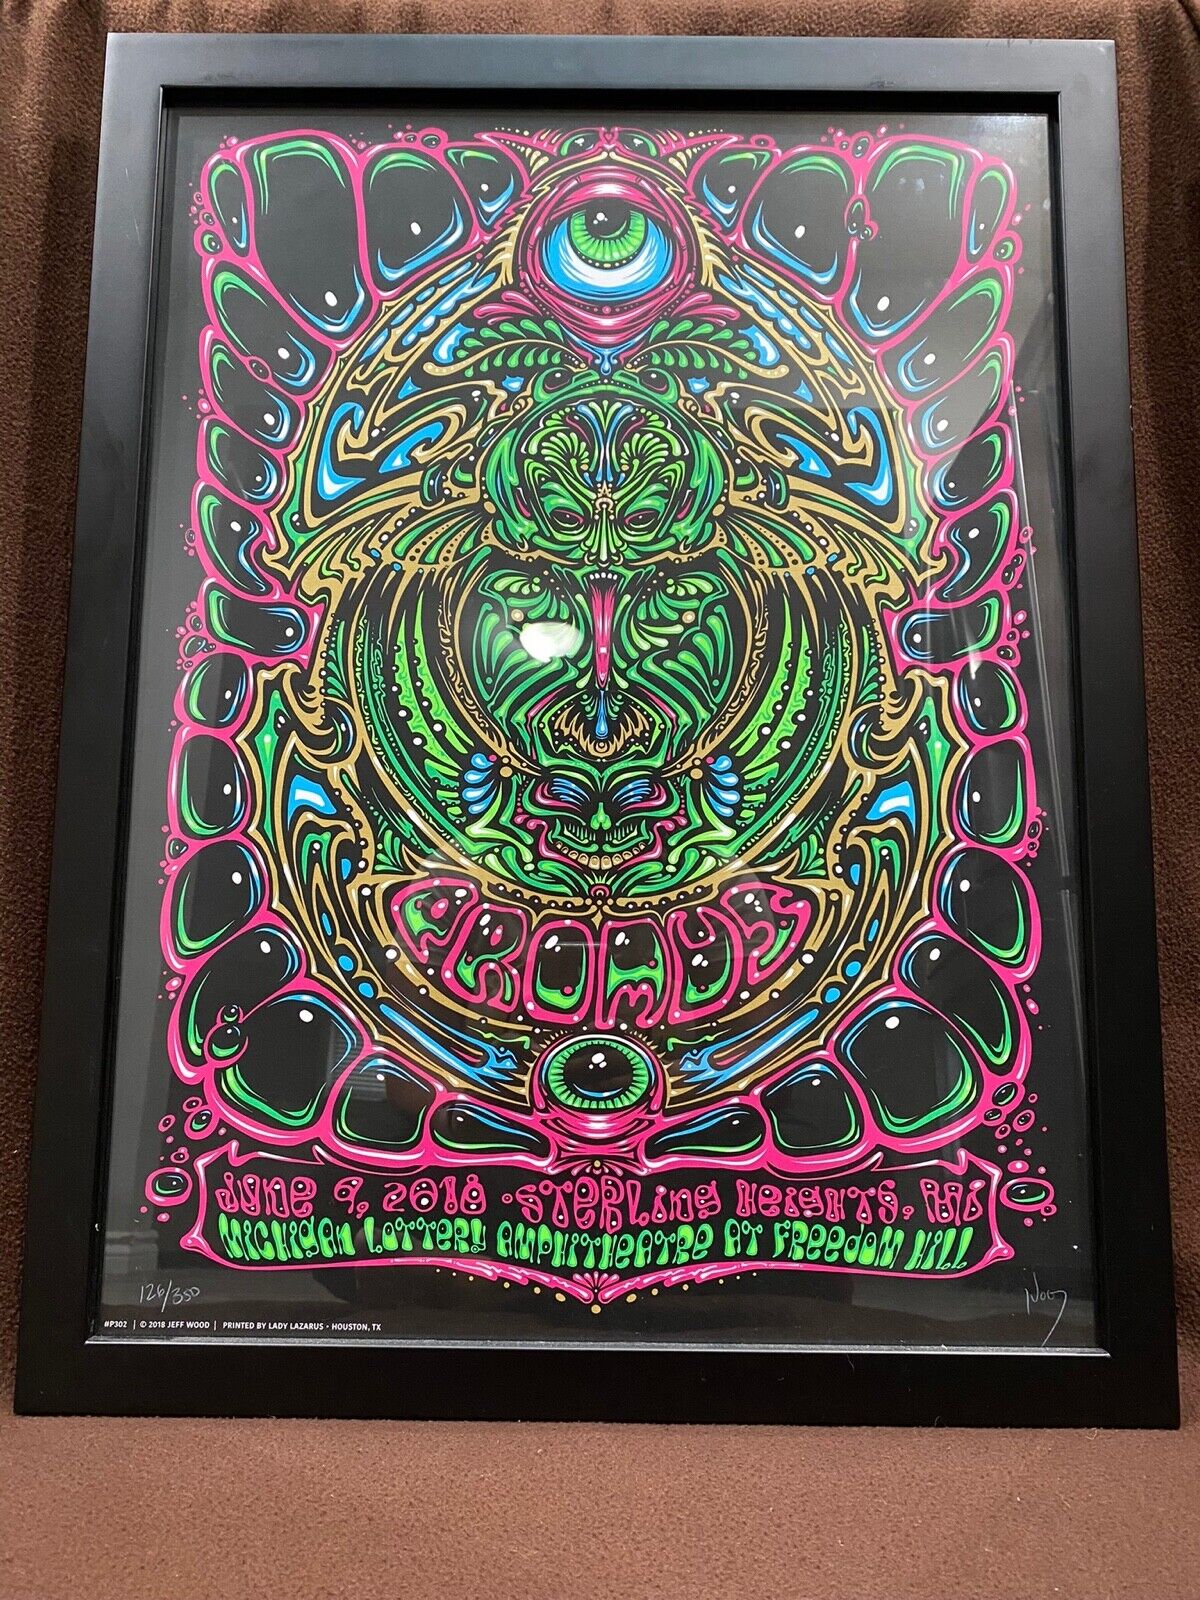 Primus Poster Freedom Hill, MI 6/9/2018 Jeff Wood signed 126/300